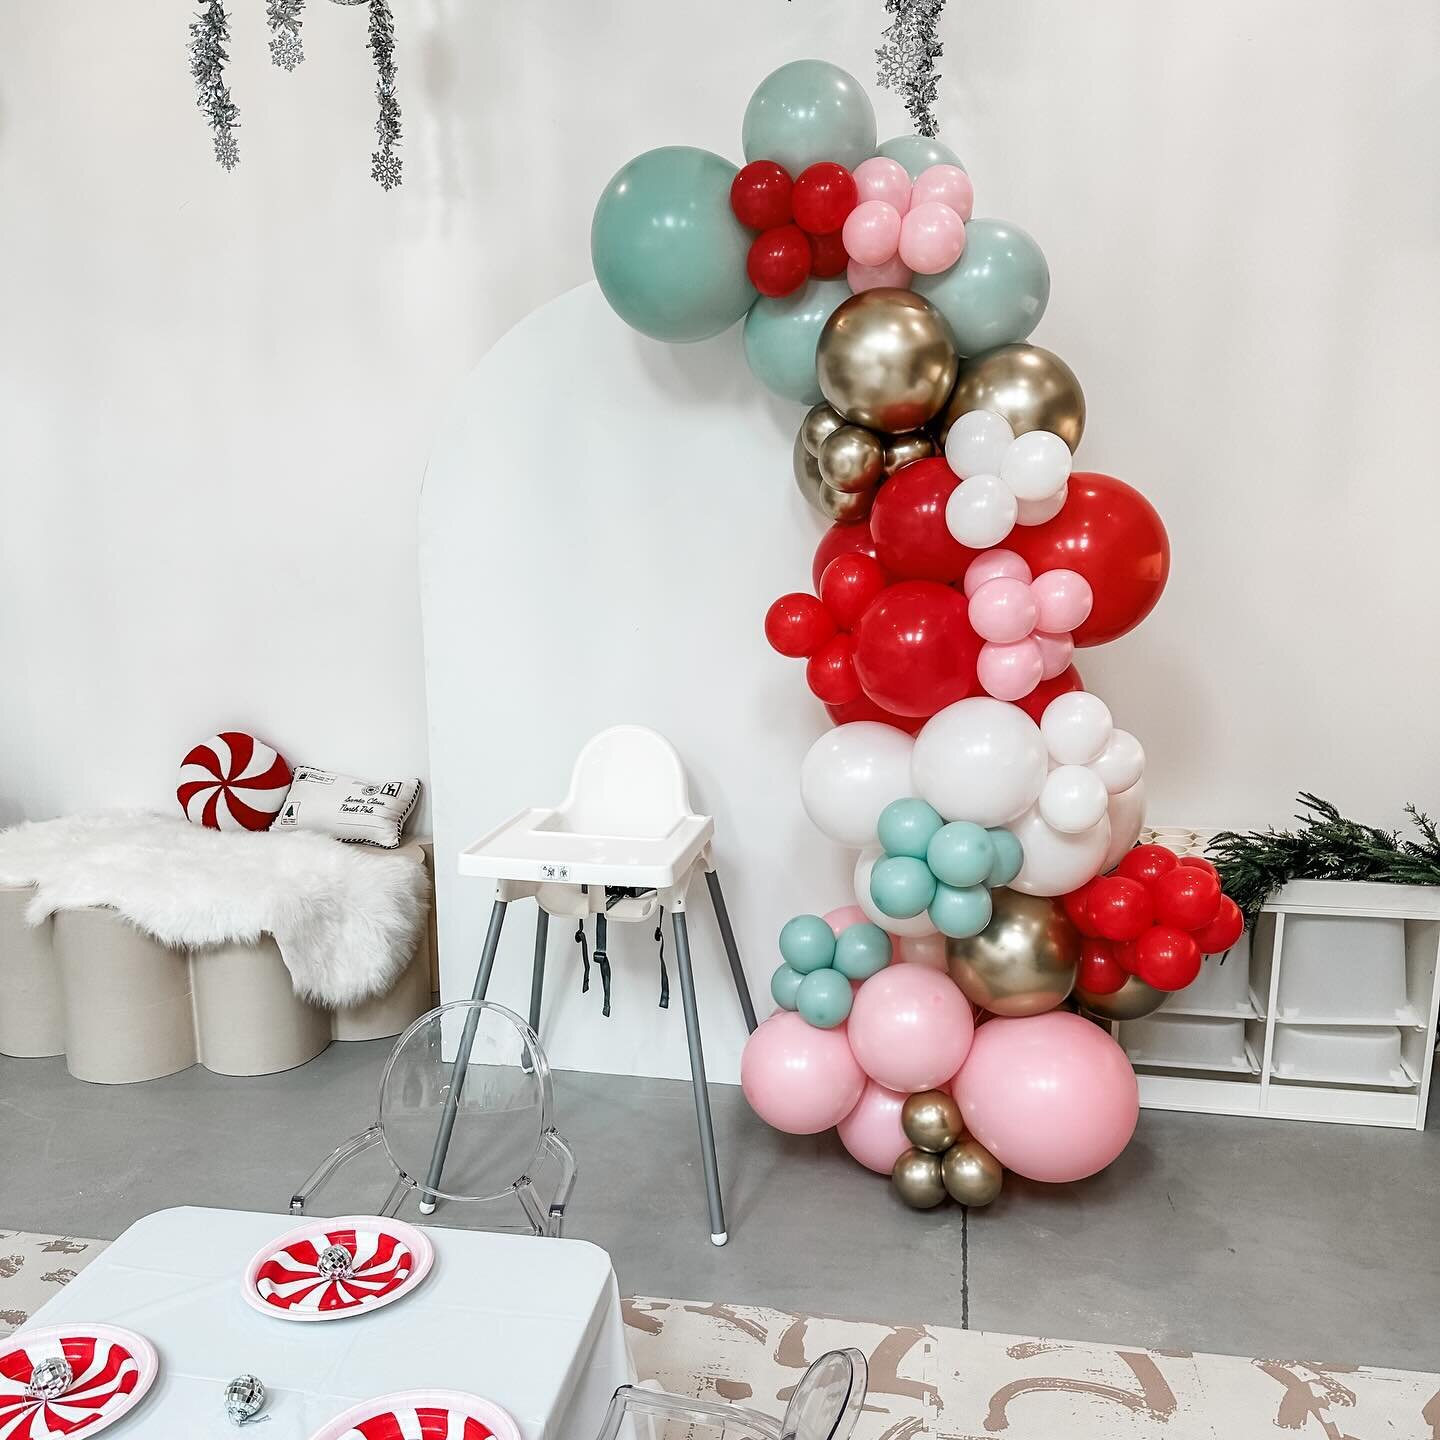 One of our Grab and Go Garlands looking really cute at @mini_milestonesaz! If you haven&rsquo;t been to this place make sure to pop in! Such an adorable place and they have an event room &hearts;️